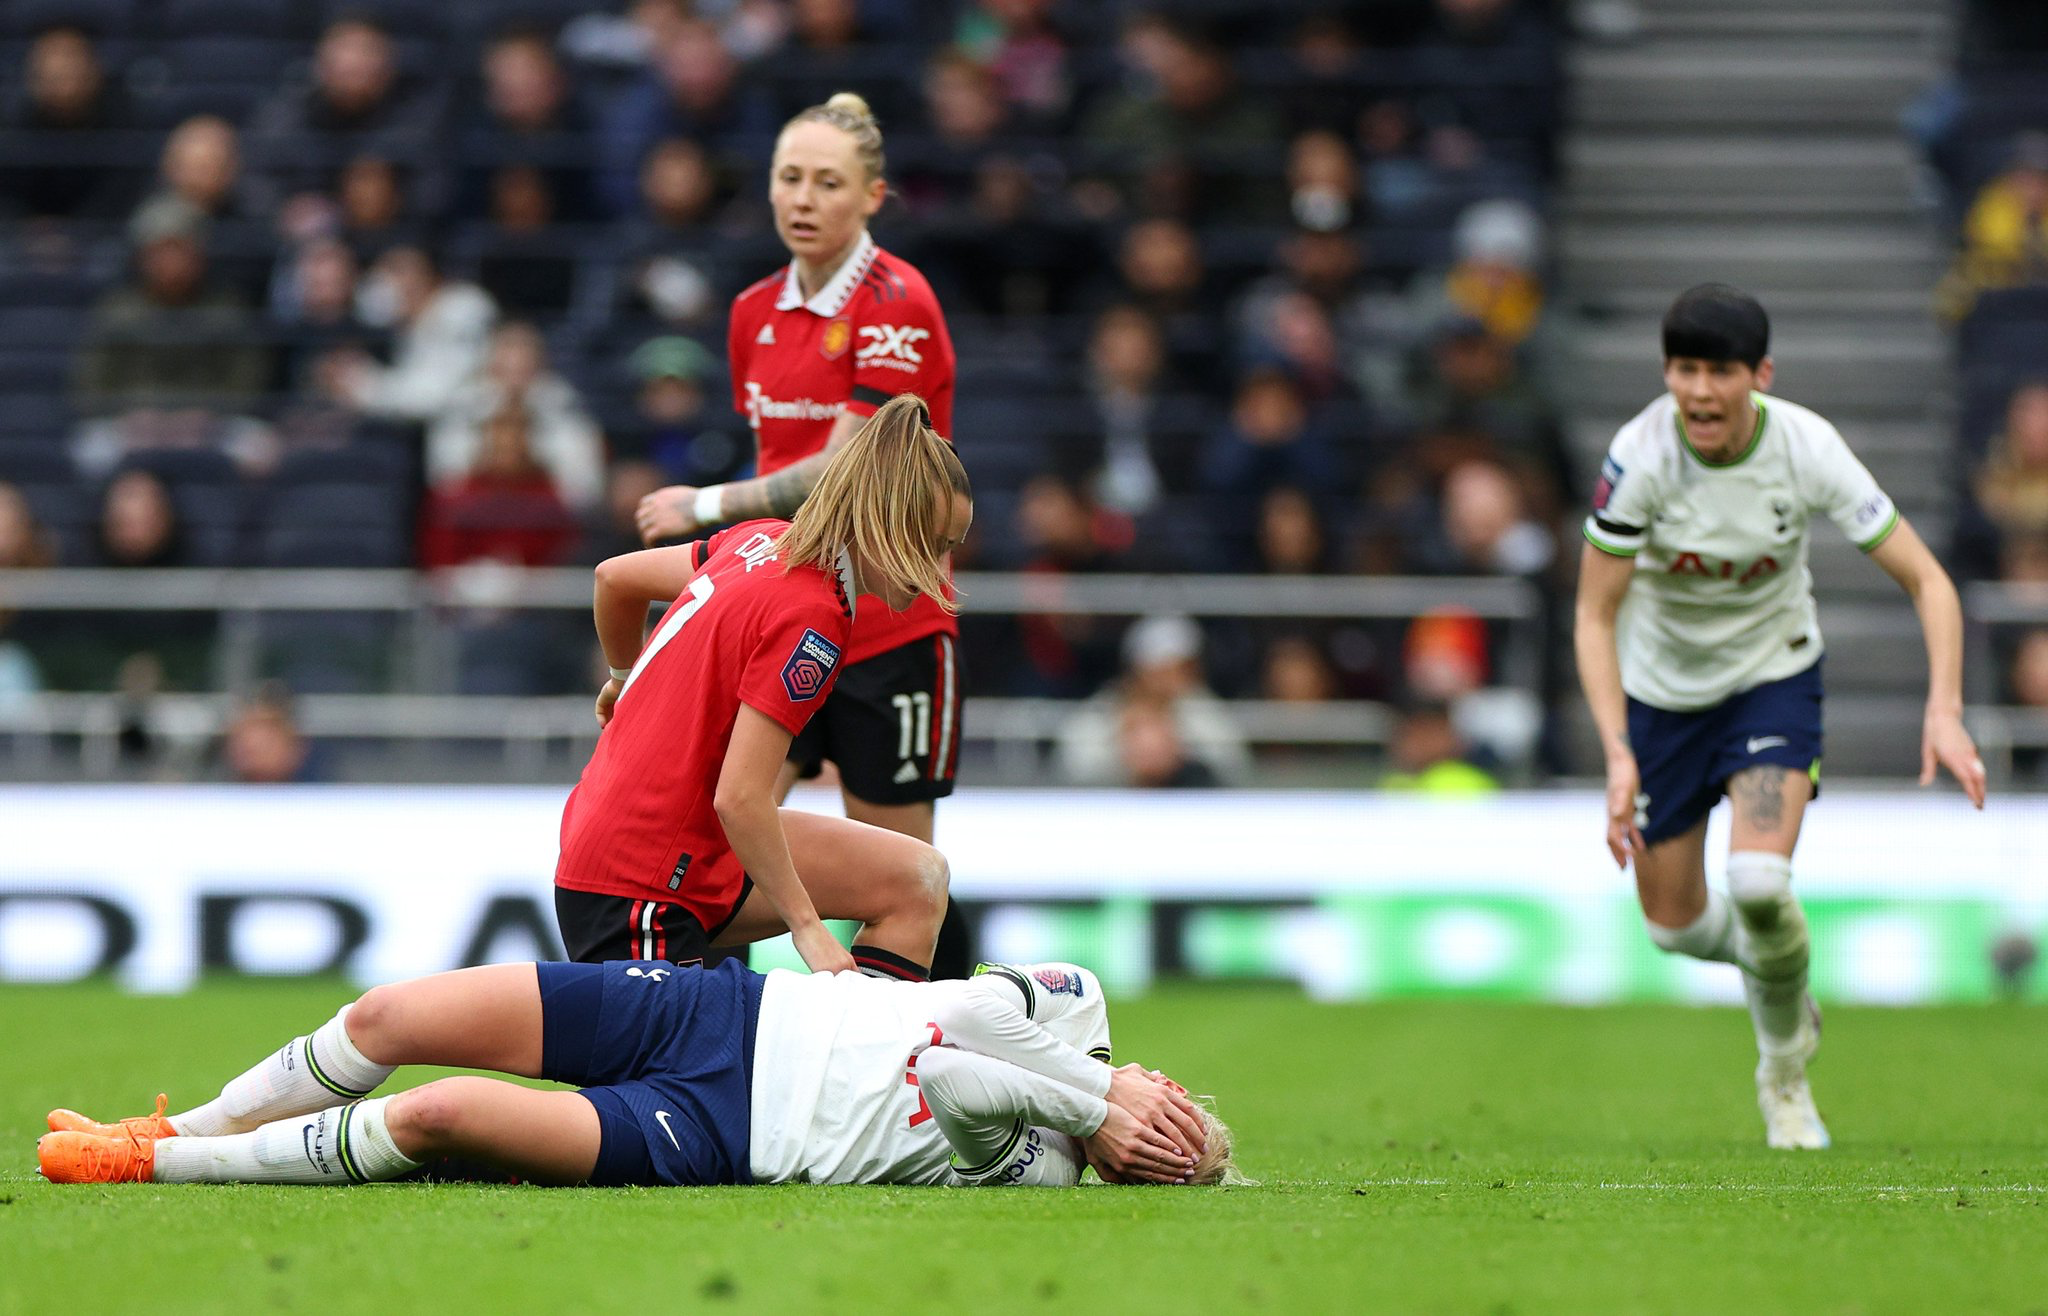 The moment of Ella Toone's red card offense on Eveliina Summanen.